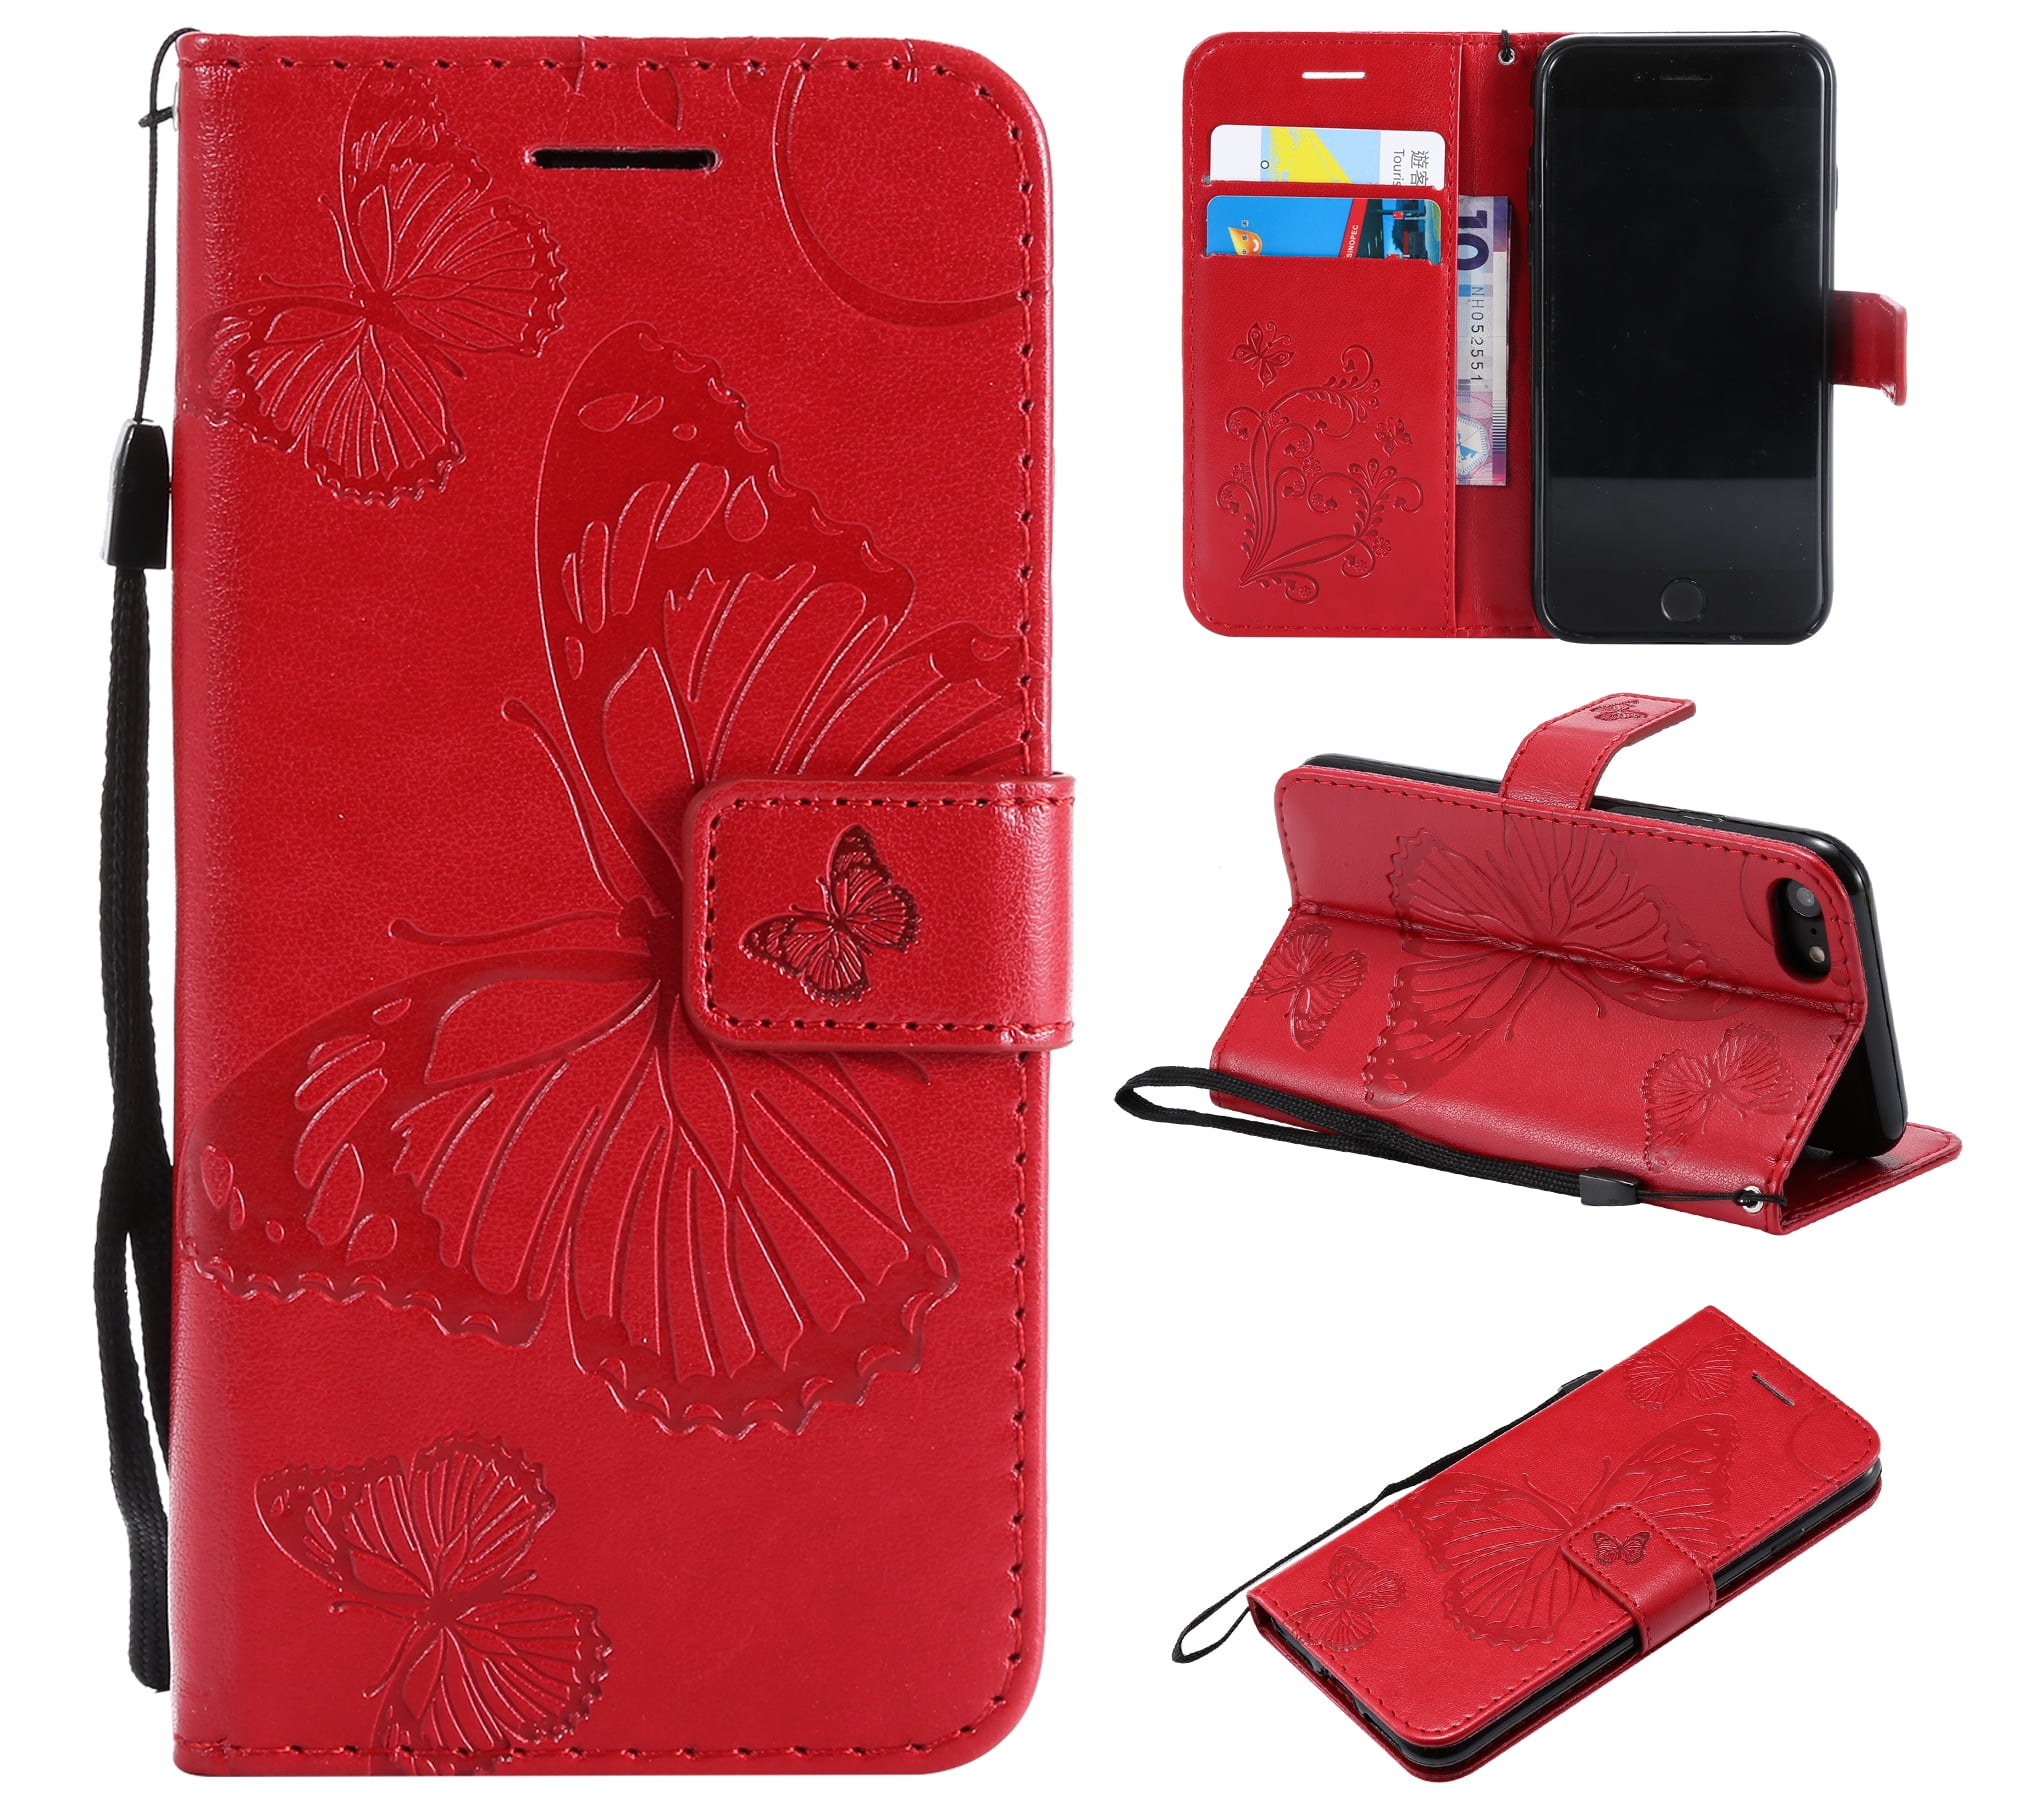 iPhone SE Case 2022/2020, iPhone 7/ 8 Wallet case, Allytech Pretty Retro  Embossed Butterfly Flower Design PU Leather Book Style Wallet Flip Case  Cover 